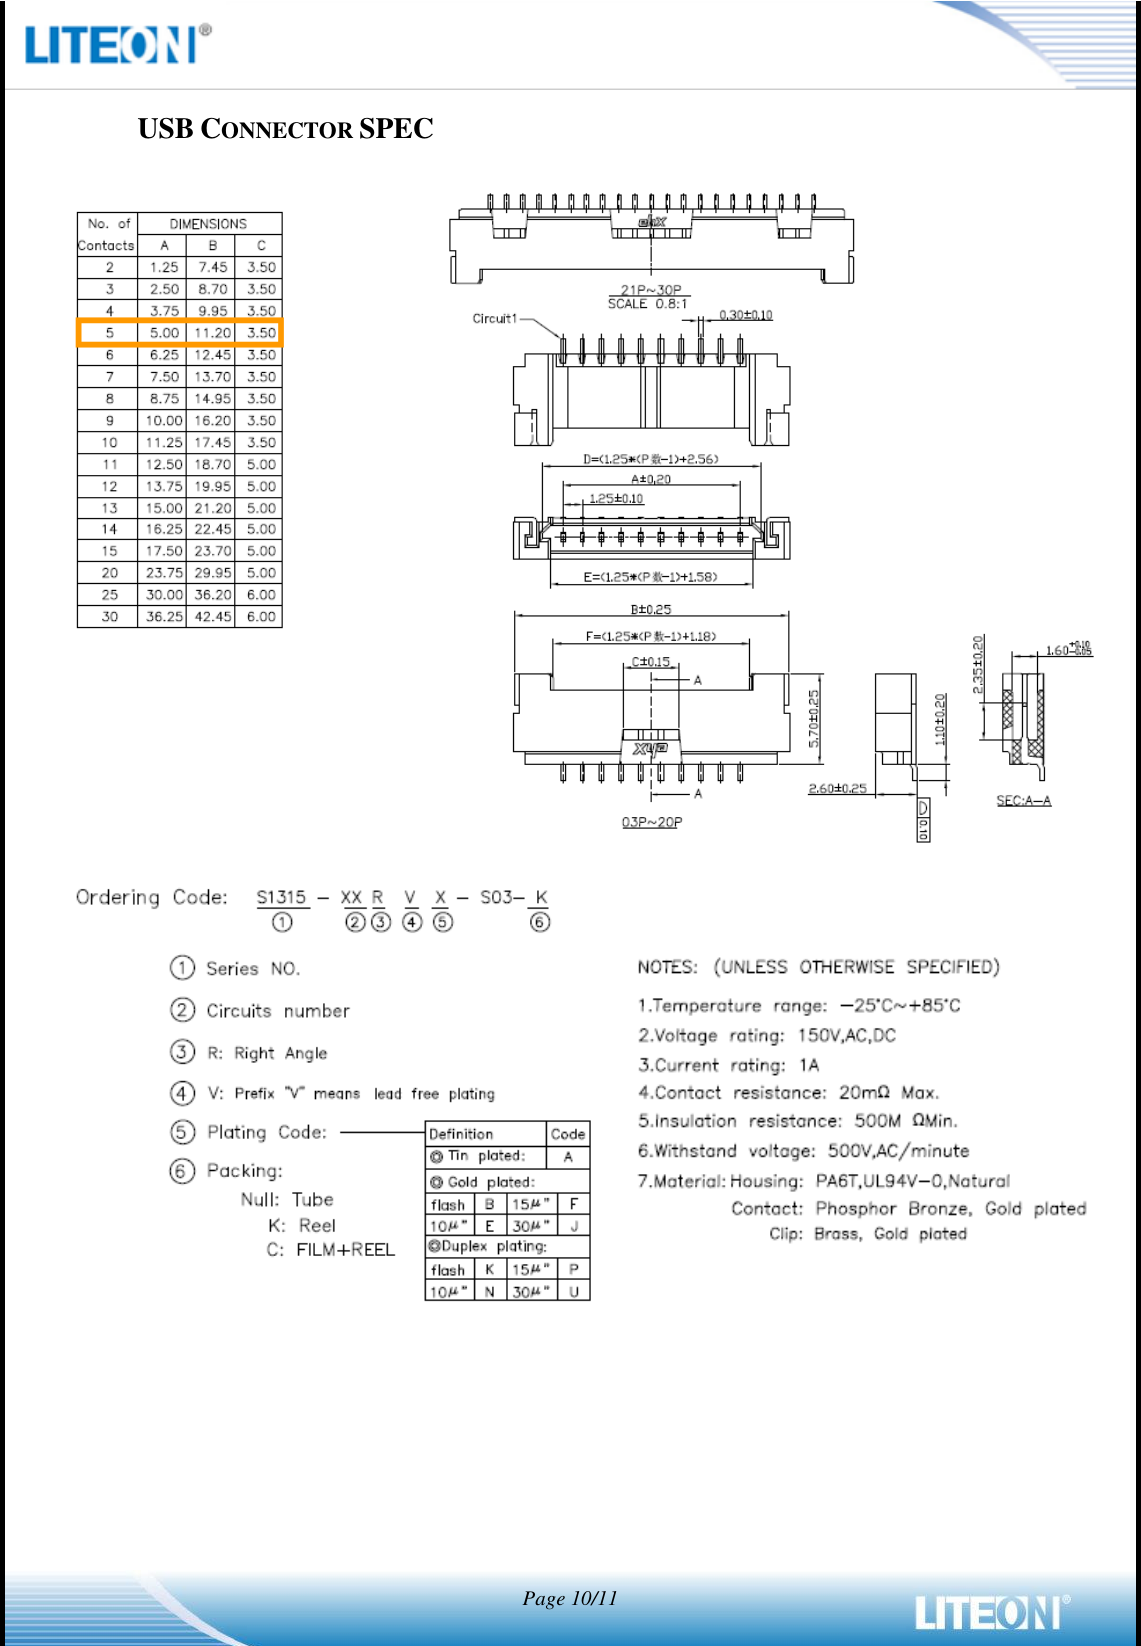   Page 10/11   USB CONNECTOR SPEC    